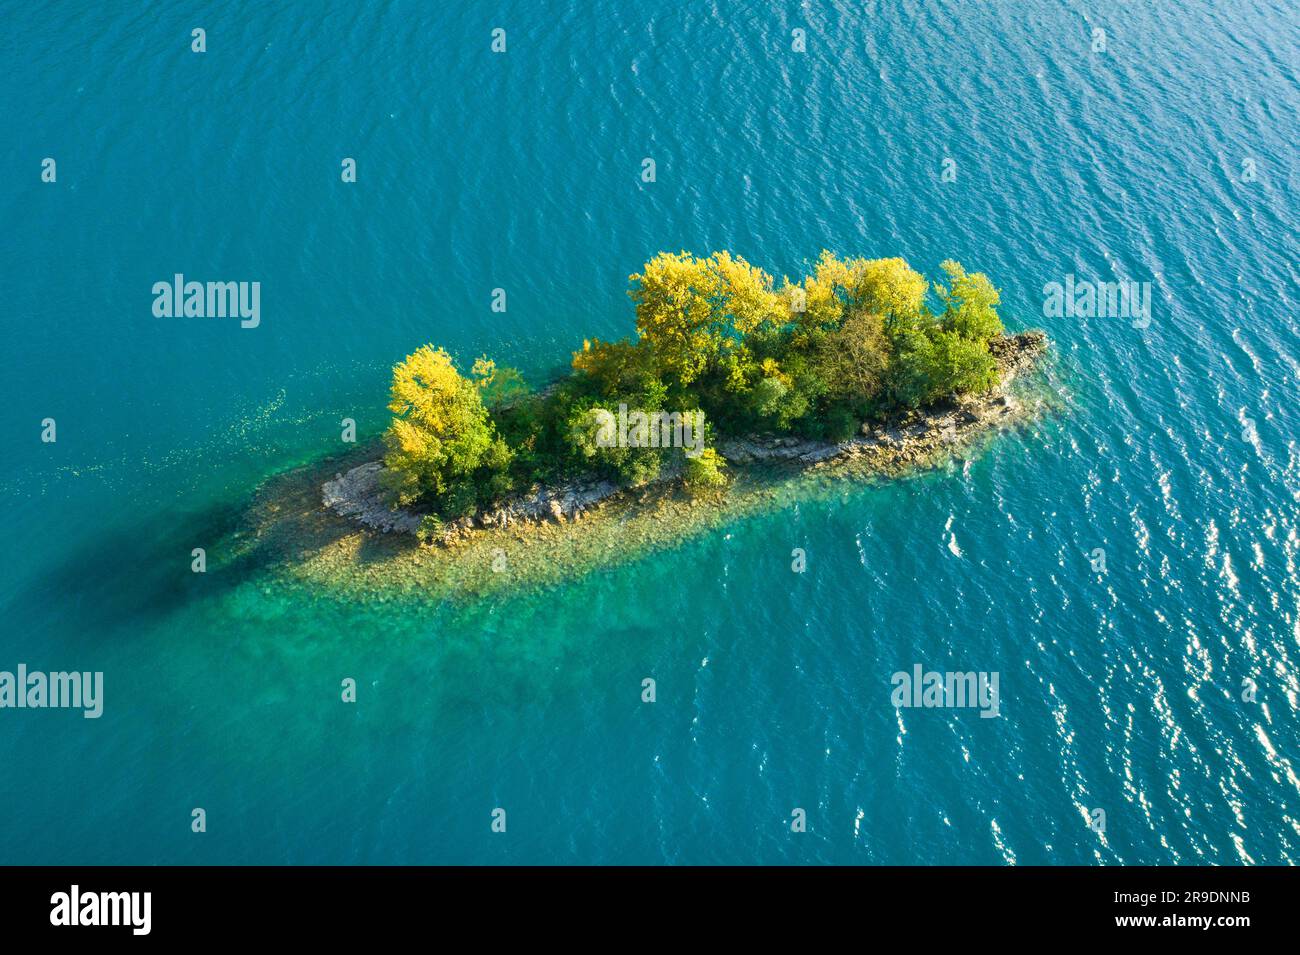 Small island (Schnittlauchinsel) in the turquoise waters of Lake Walen (Walensee). Canton St. Gallen, Switzerland Stock Photo